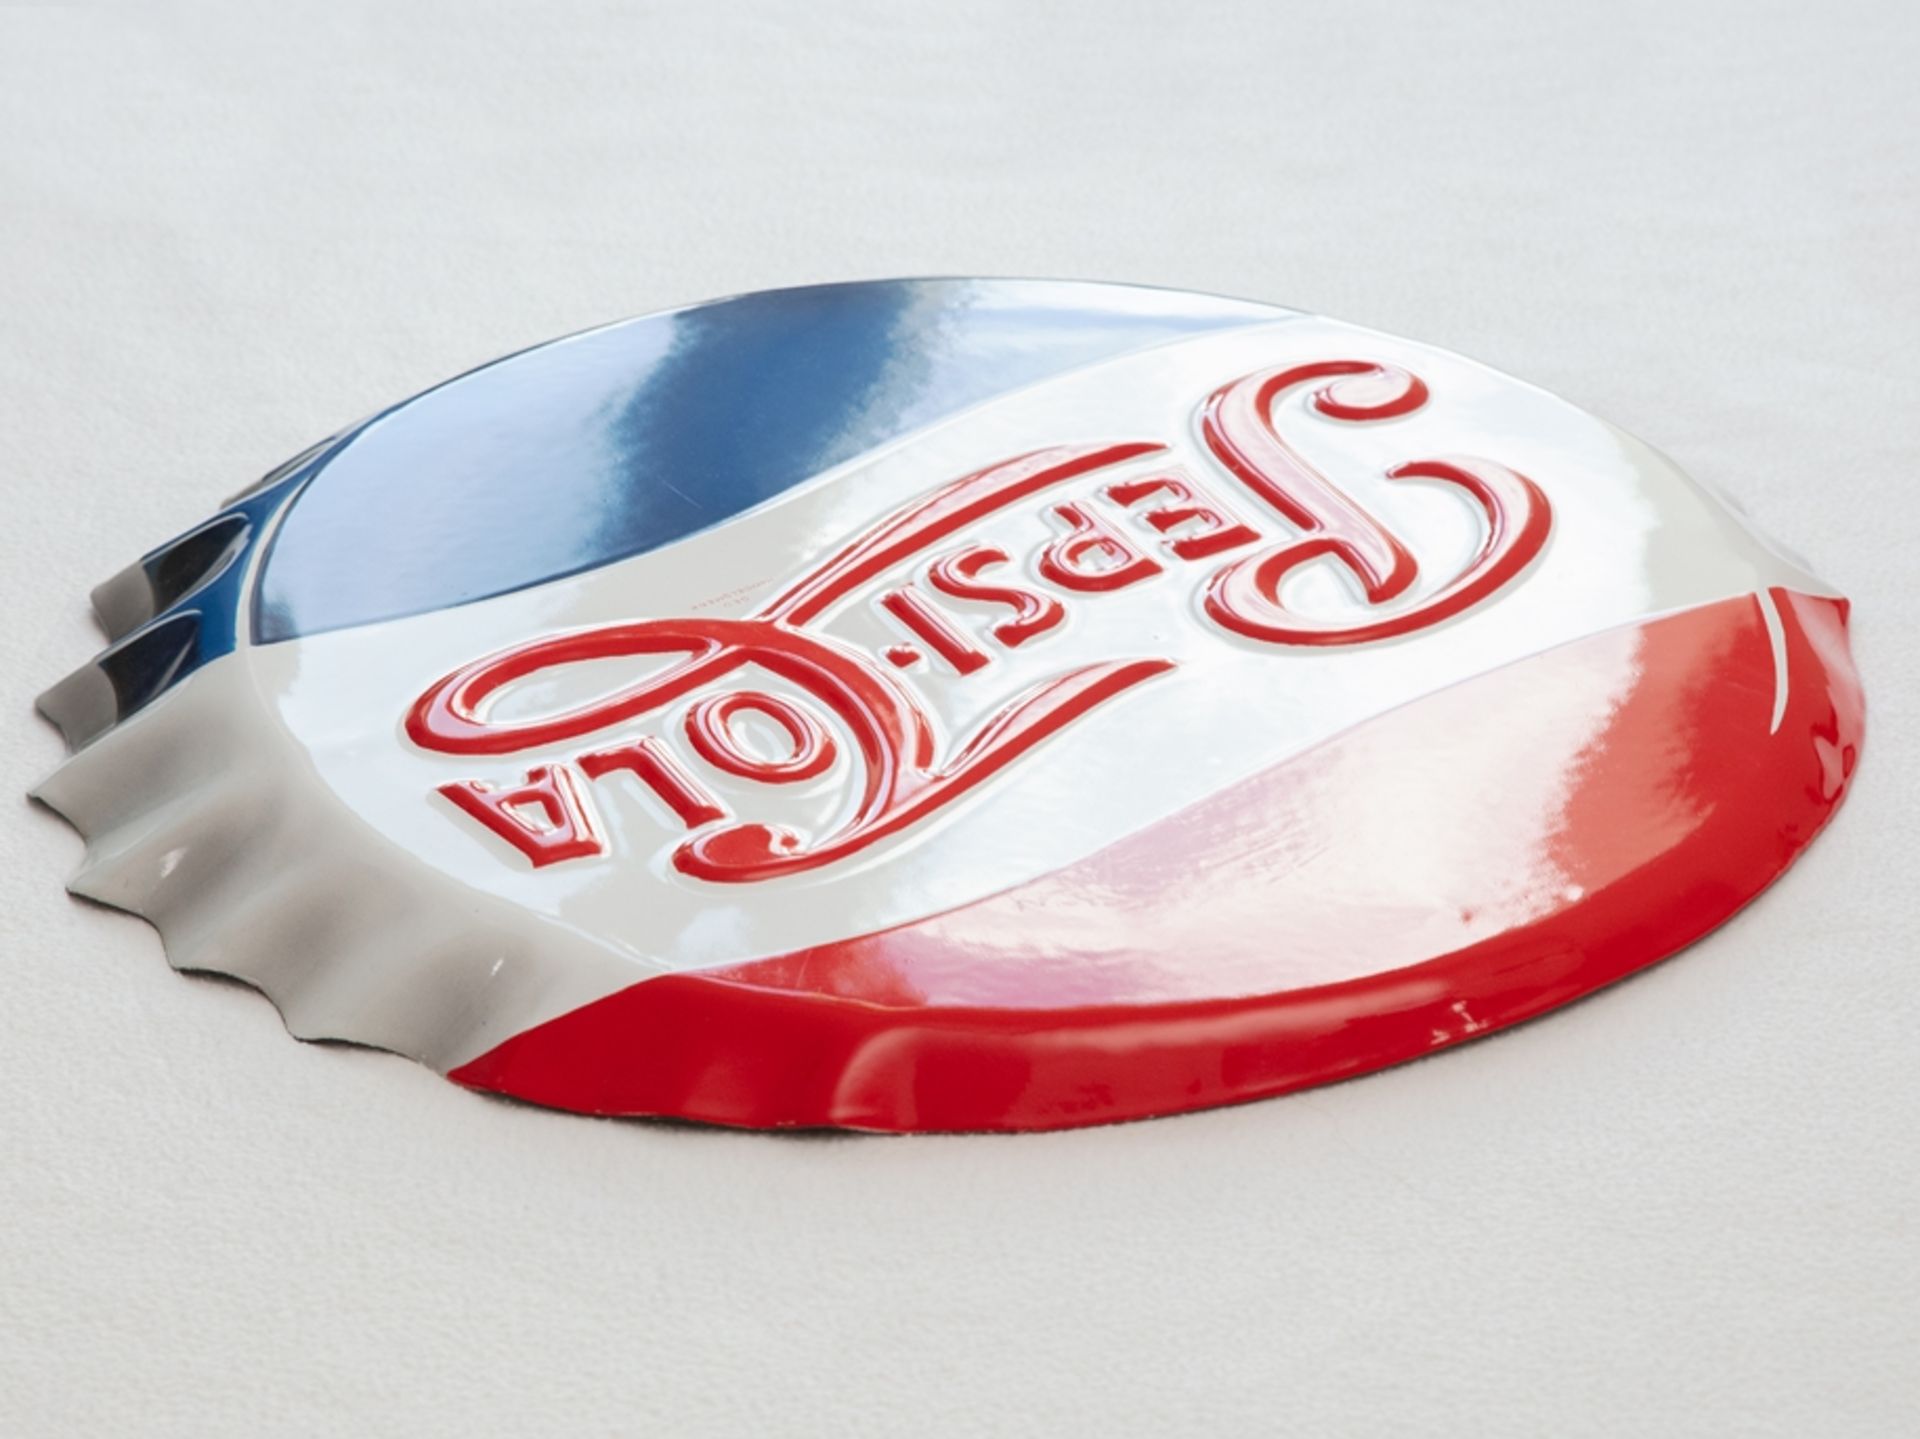 Enamel sign Pepsi Cola lid in dream condition! Netherlands around 1950 - Image 5 of 7